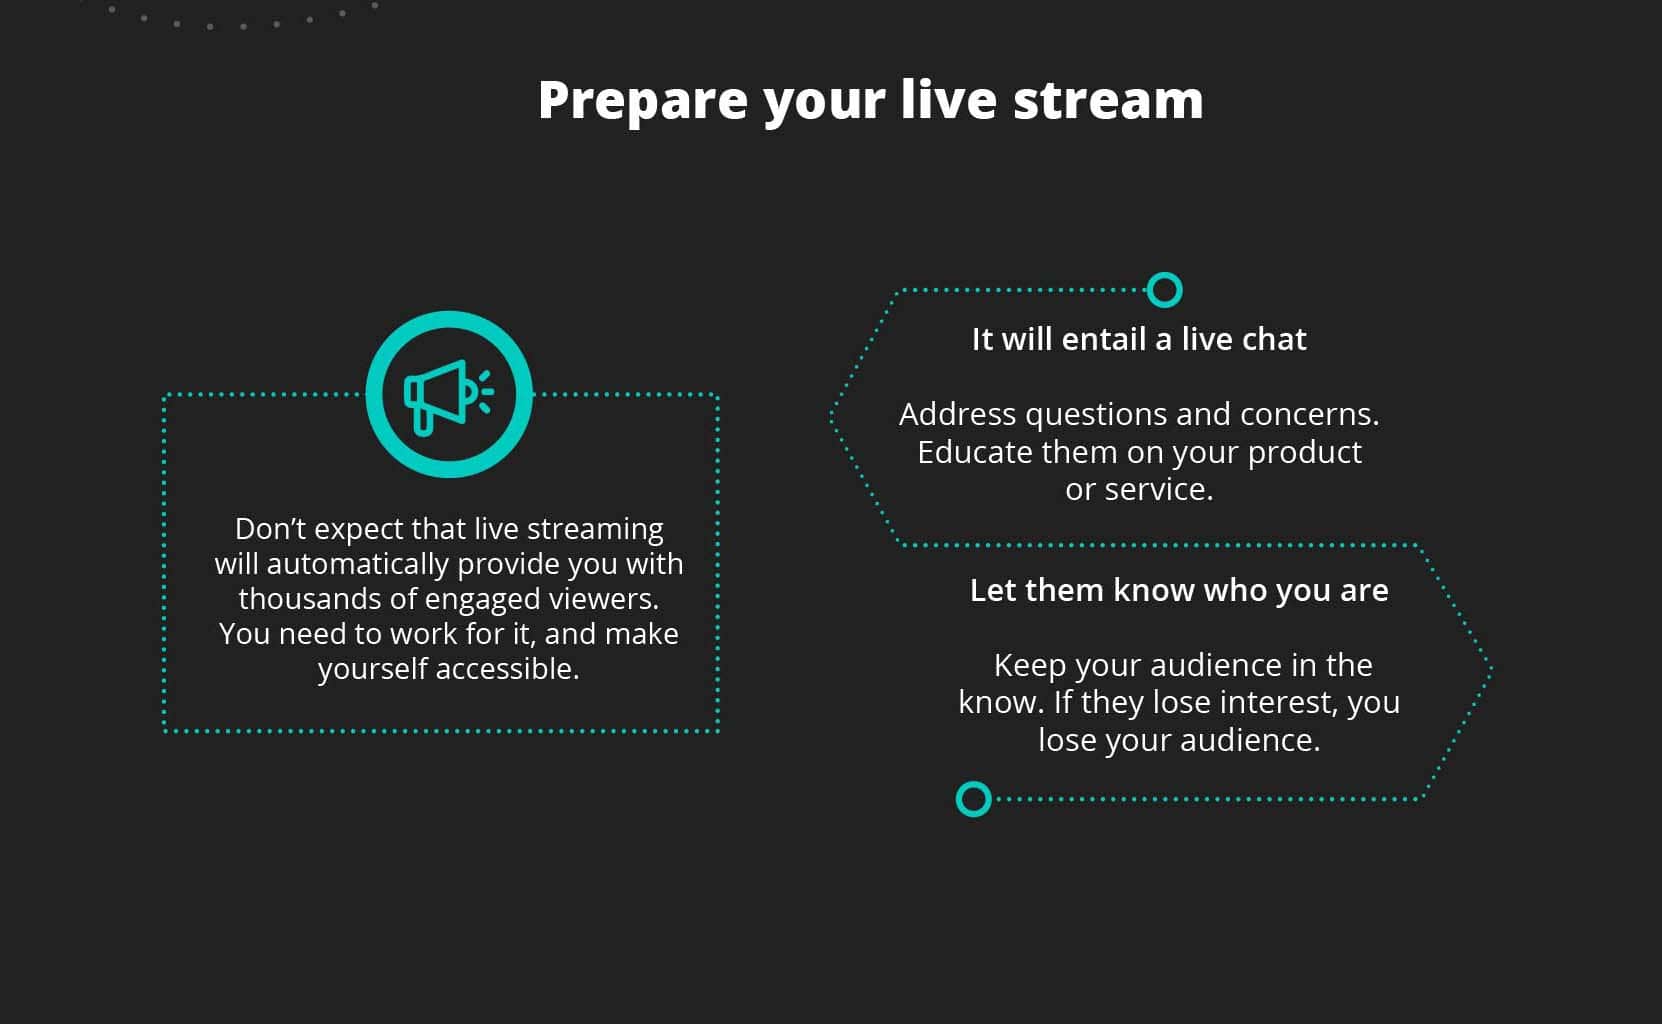 How to prepare a live streaming